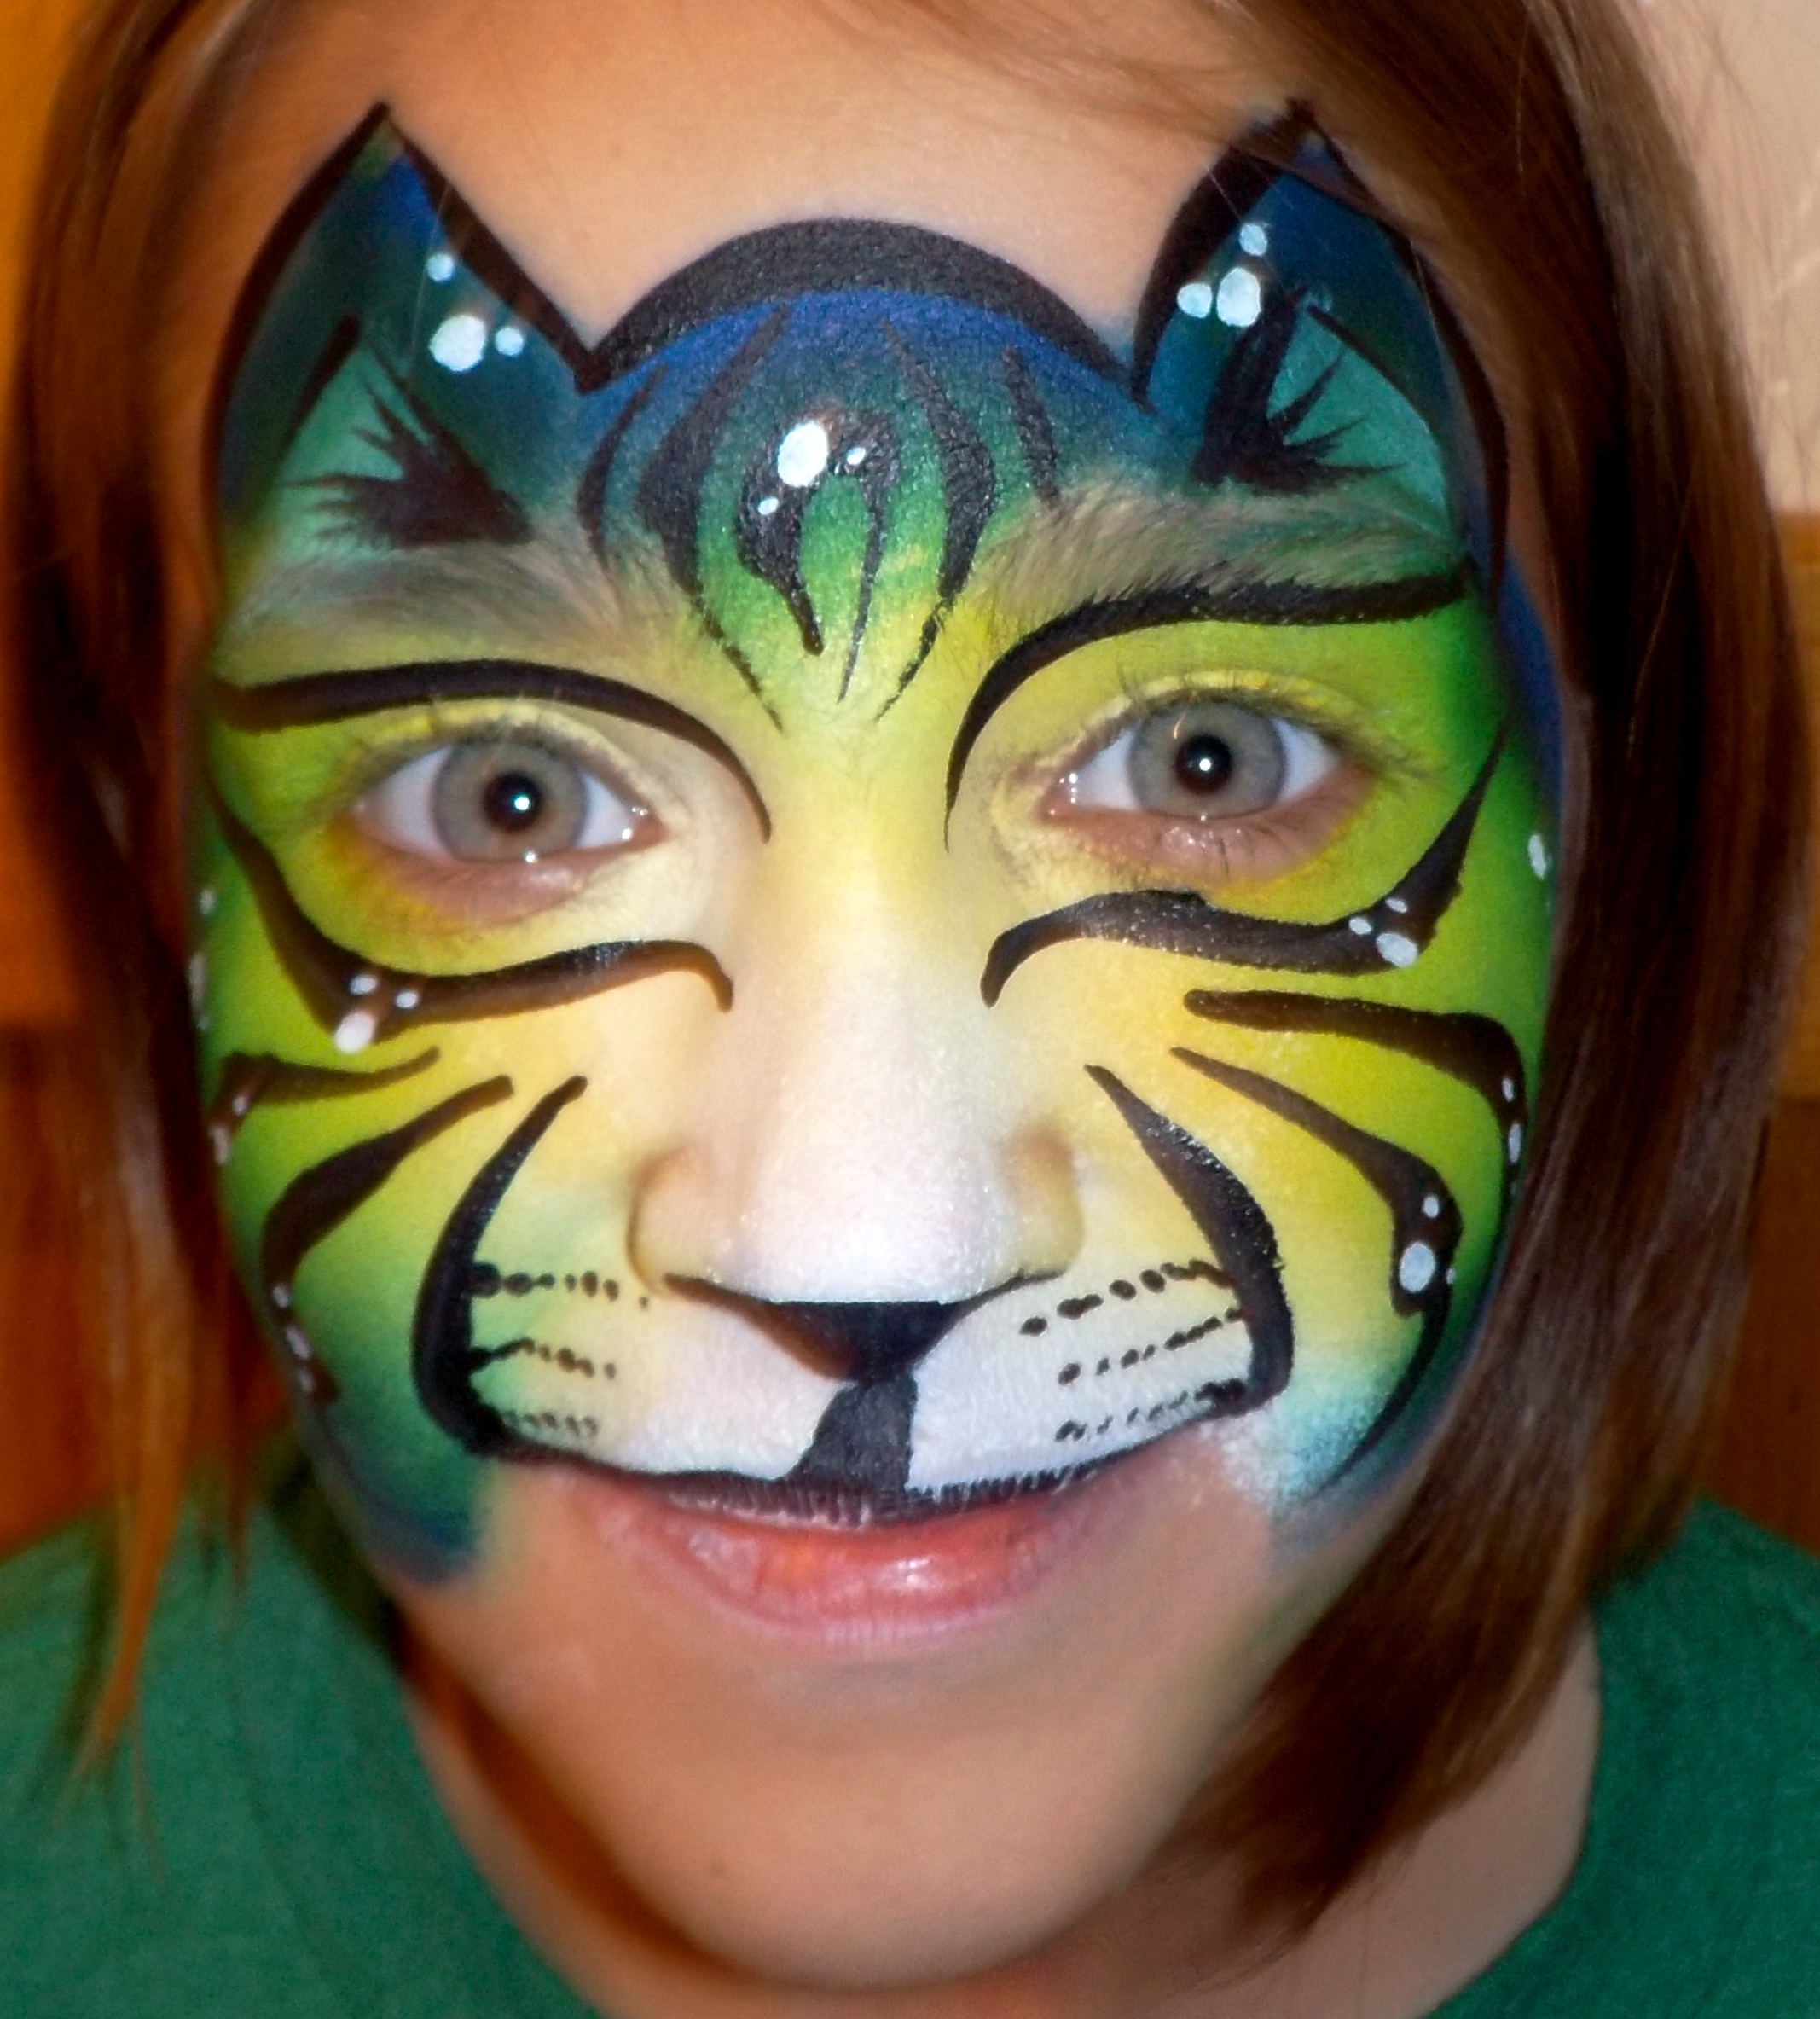 Facepaint by Clementine the Amazing